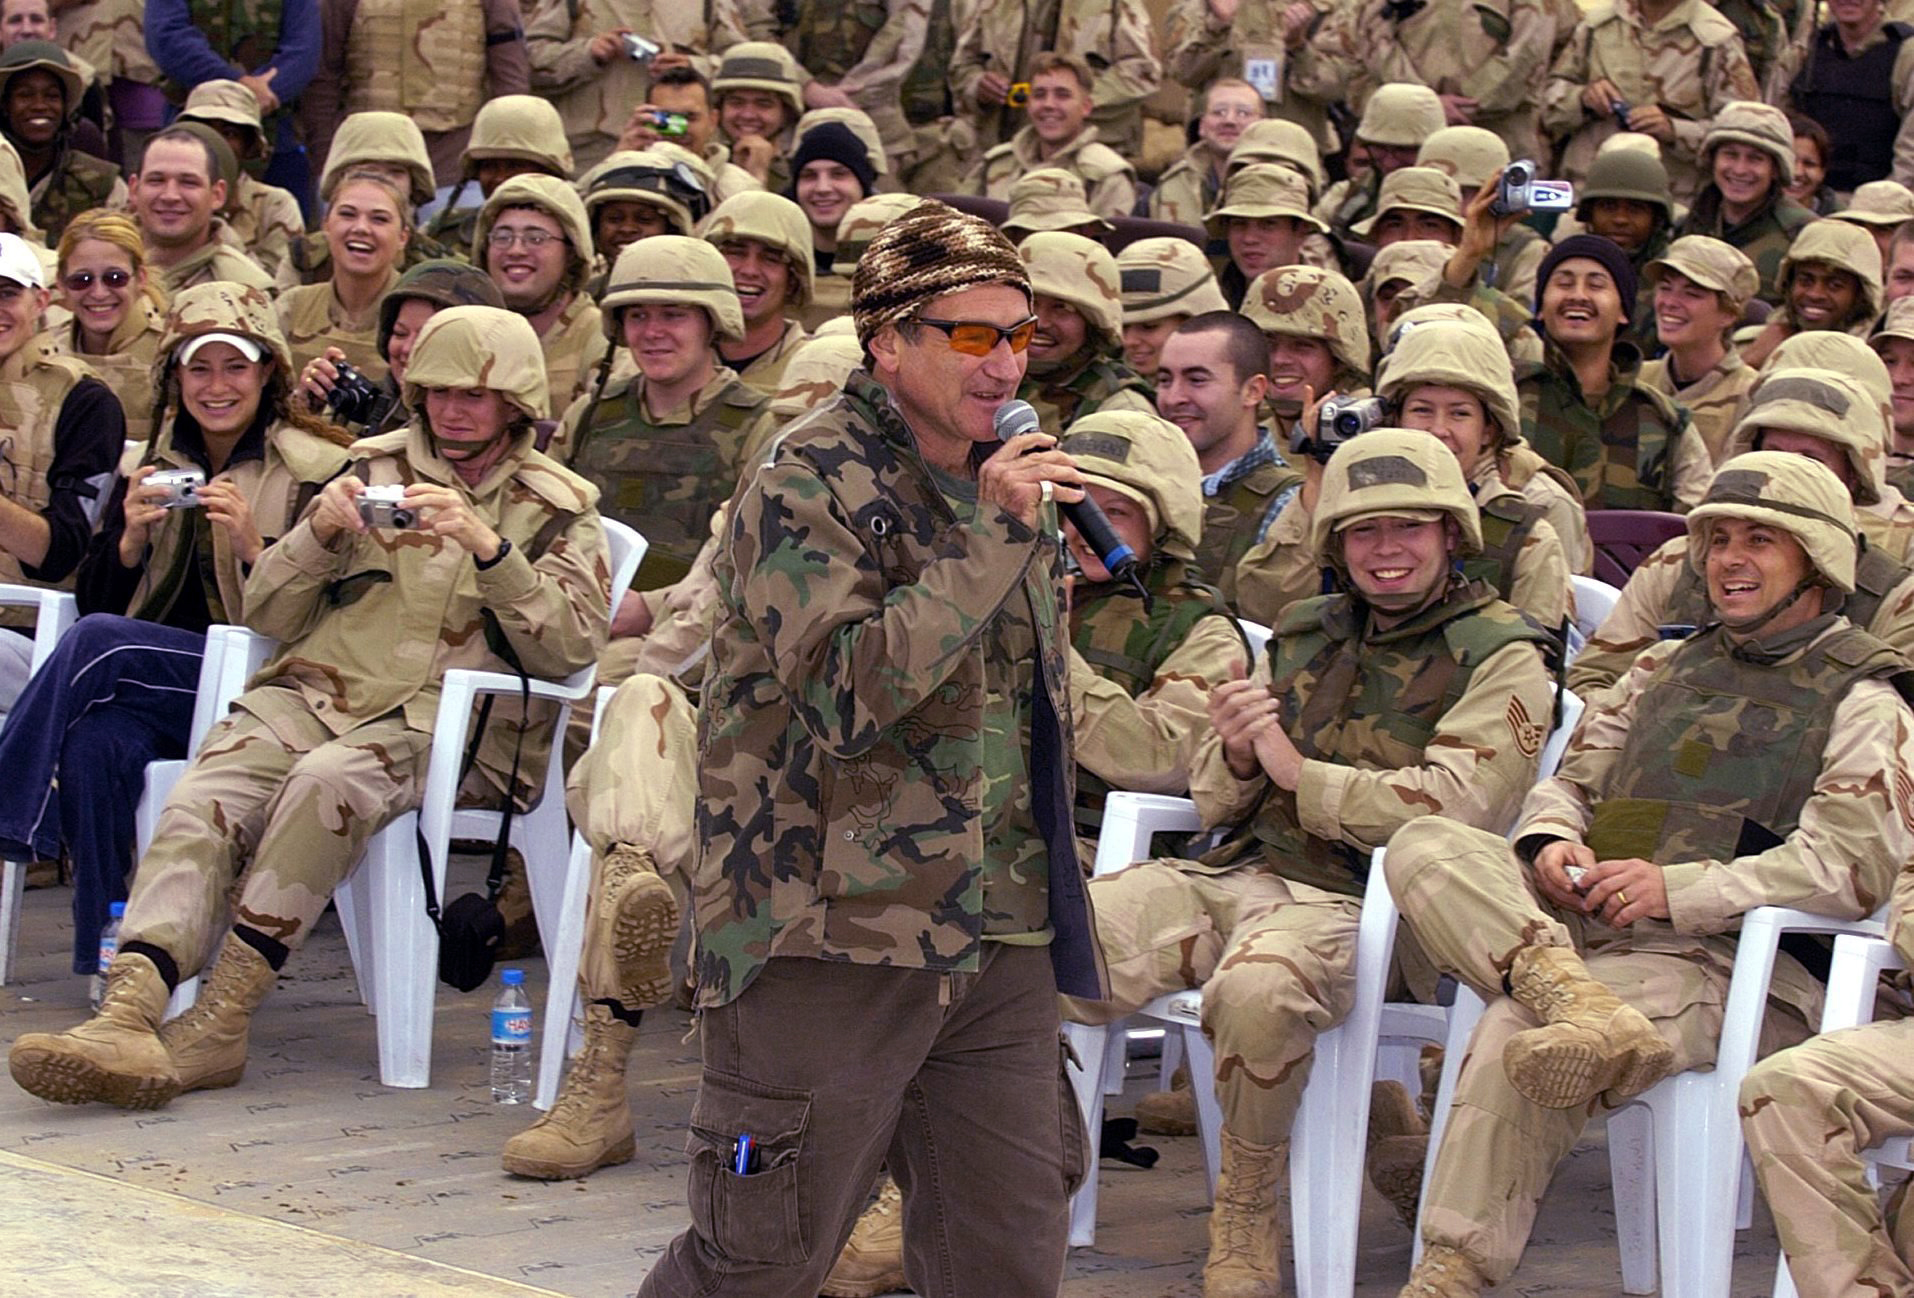 Robin Williams wears a camouflage jacket while entertaining a cheering crowd of US troops as part of a United Service Organiztions (USO) Holiday Tour at the International Airport in Baghdad, Dec. 16, 2003.